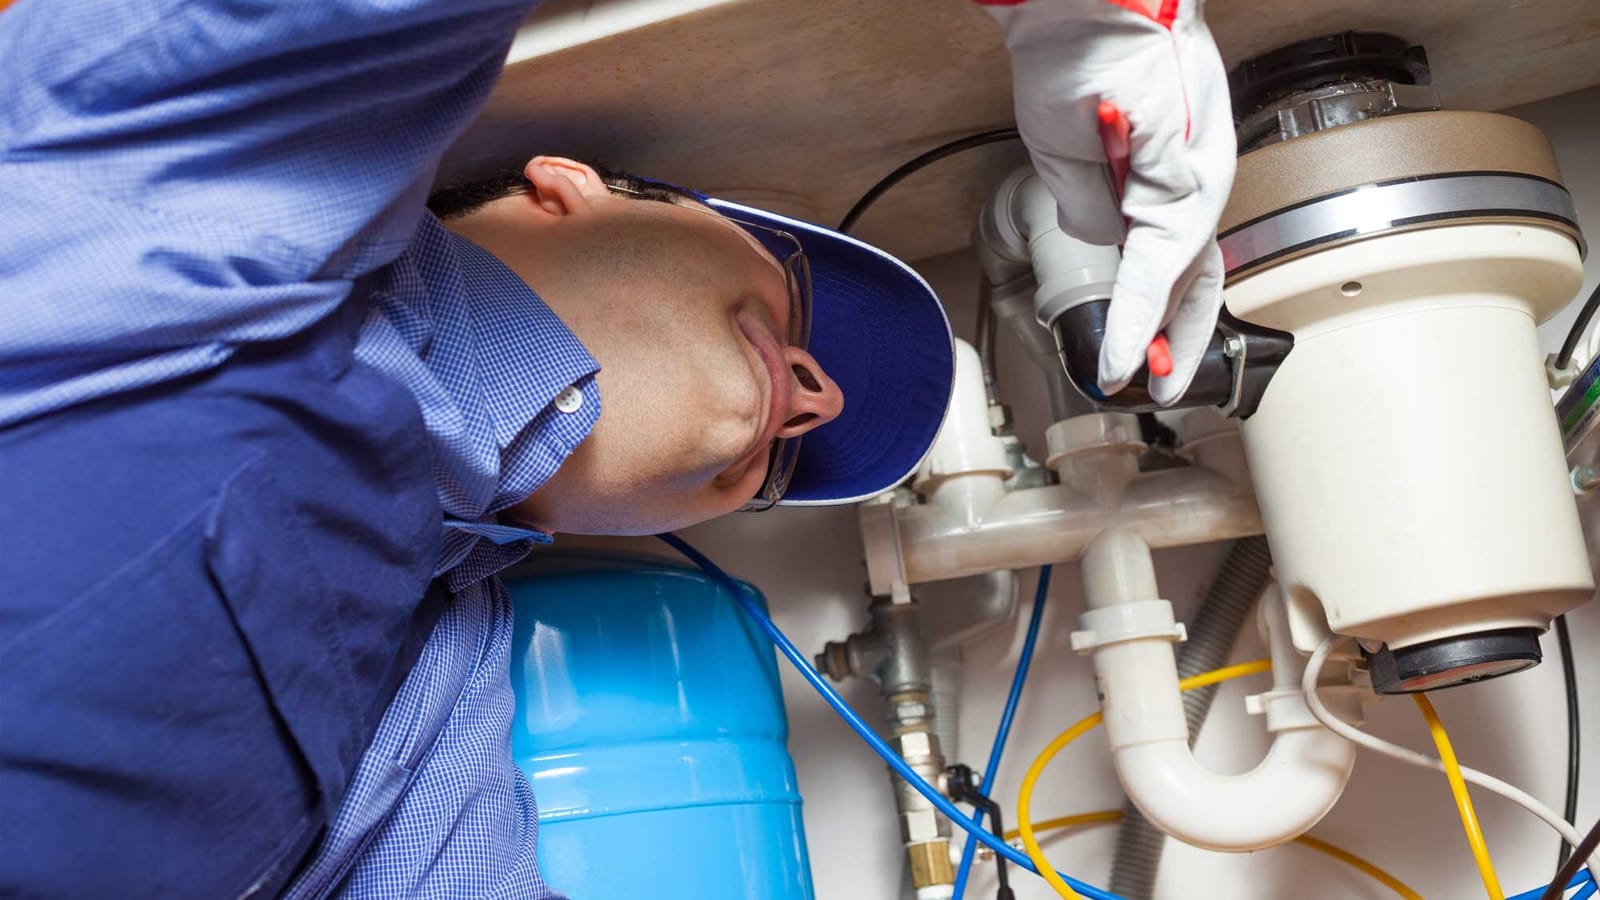 TX Pearland Water Heater, US, plumber